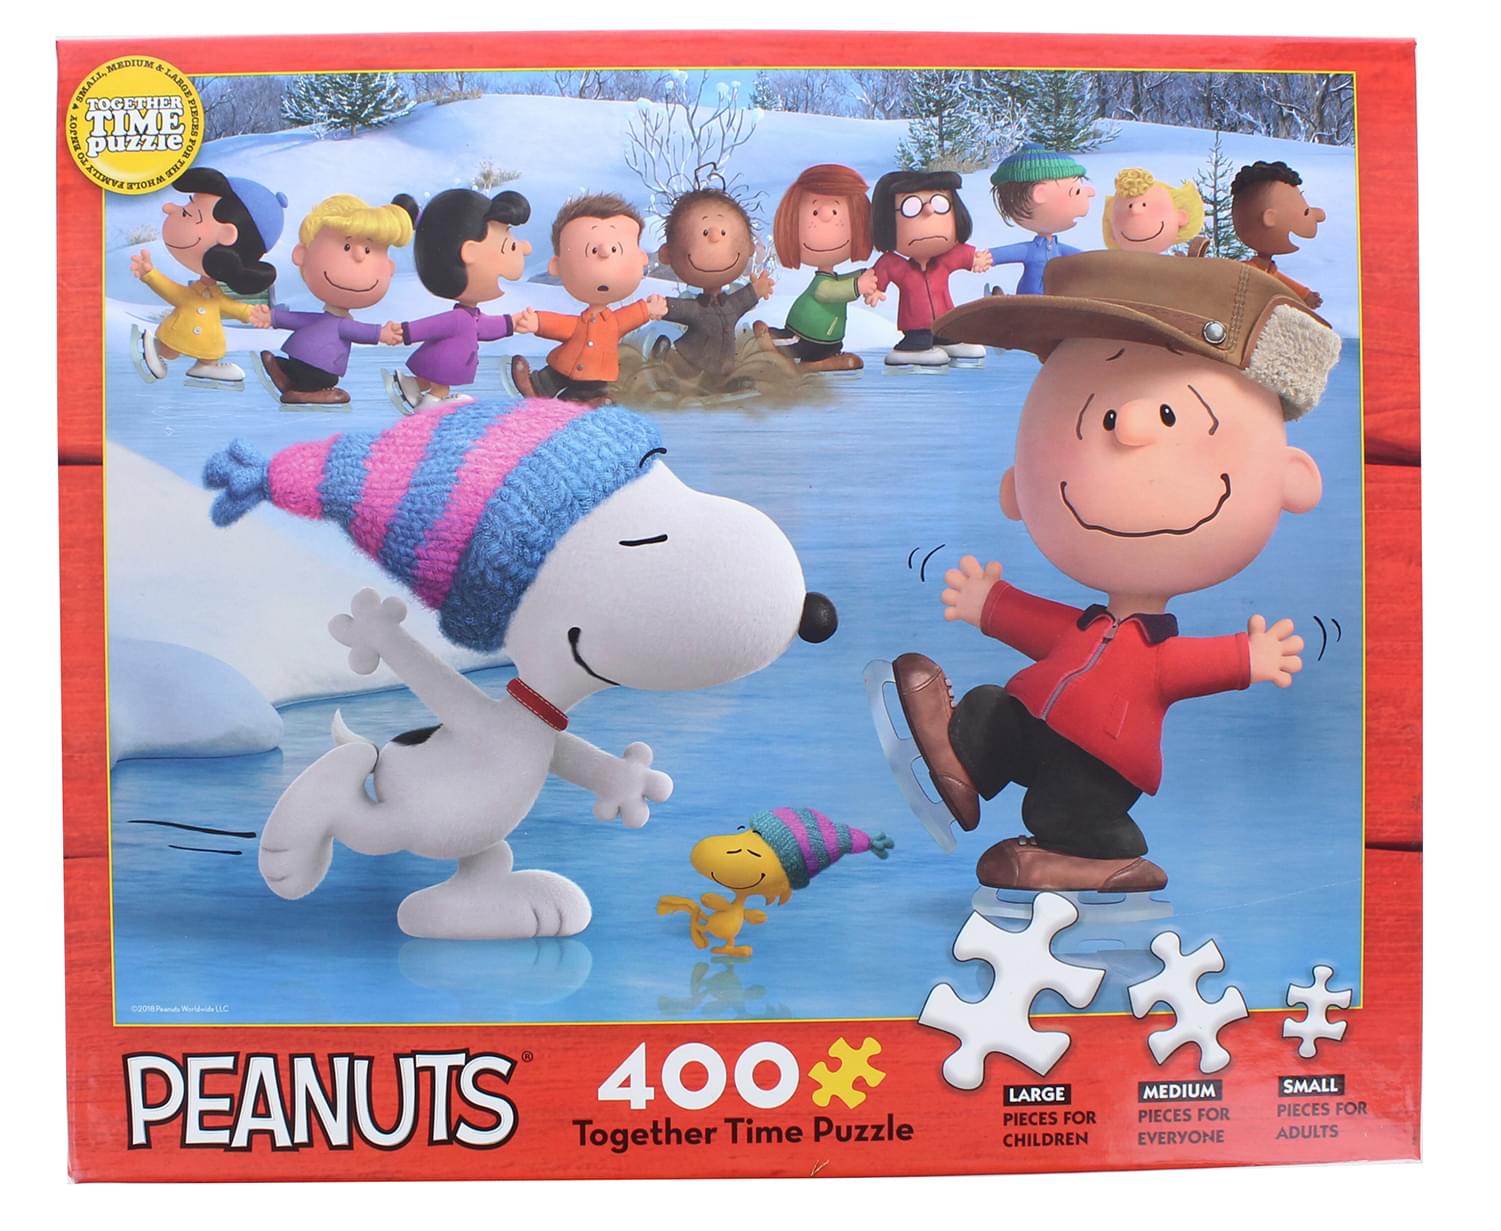 Peanuts Together Time 400 Piece Jigsaw Puzzle